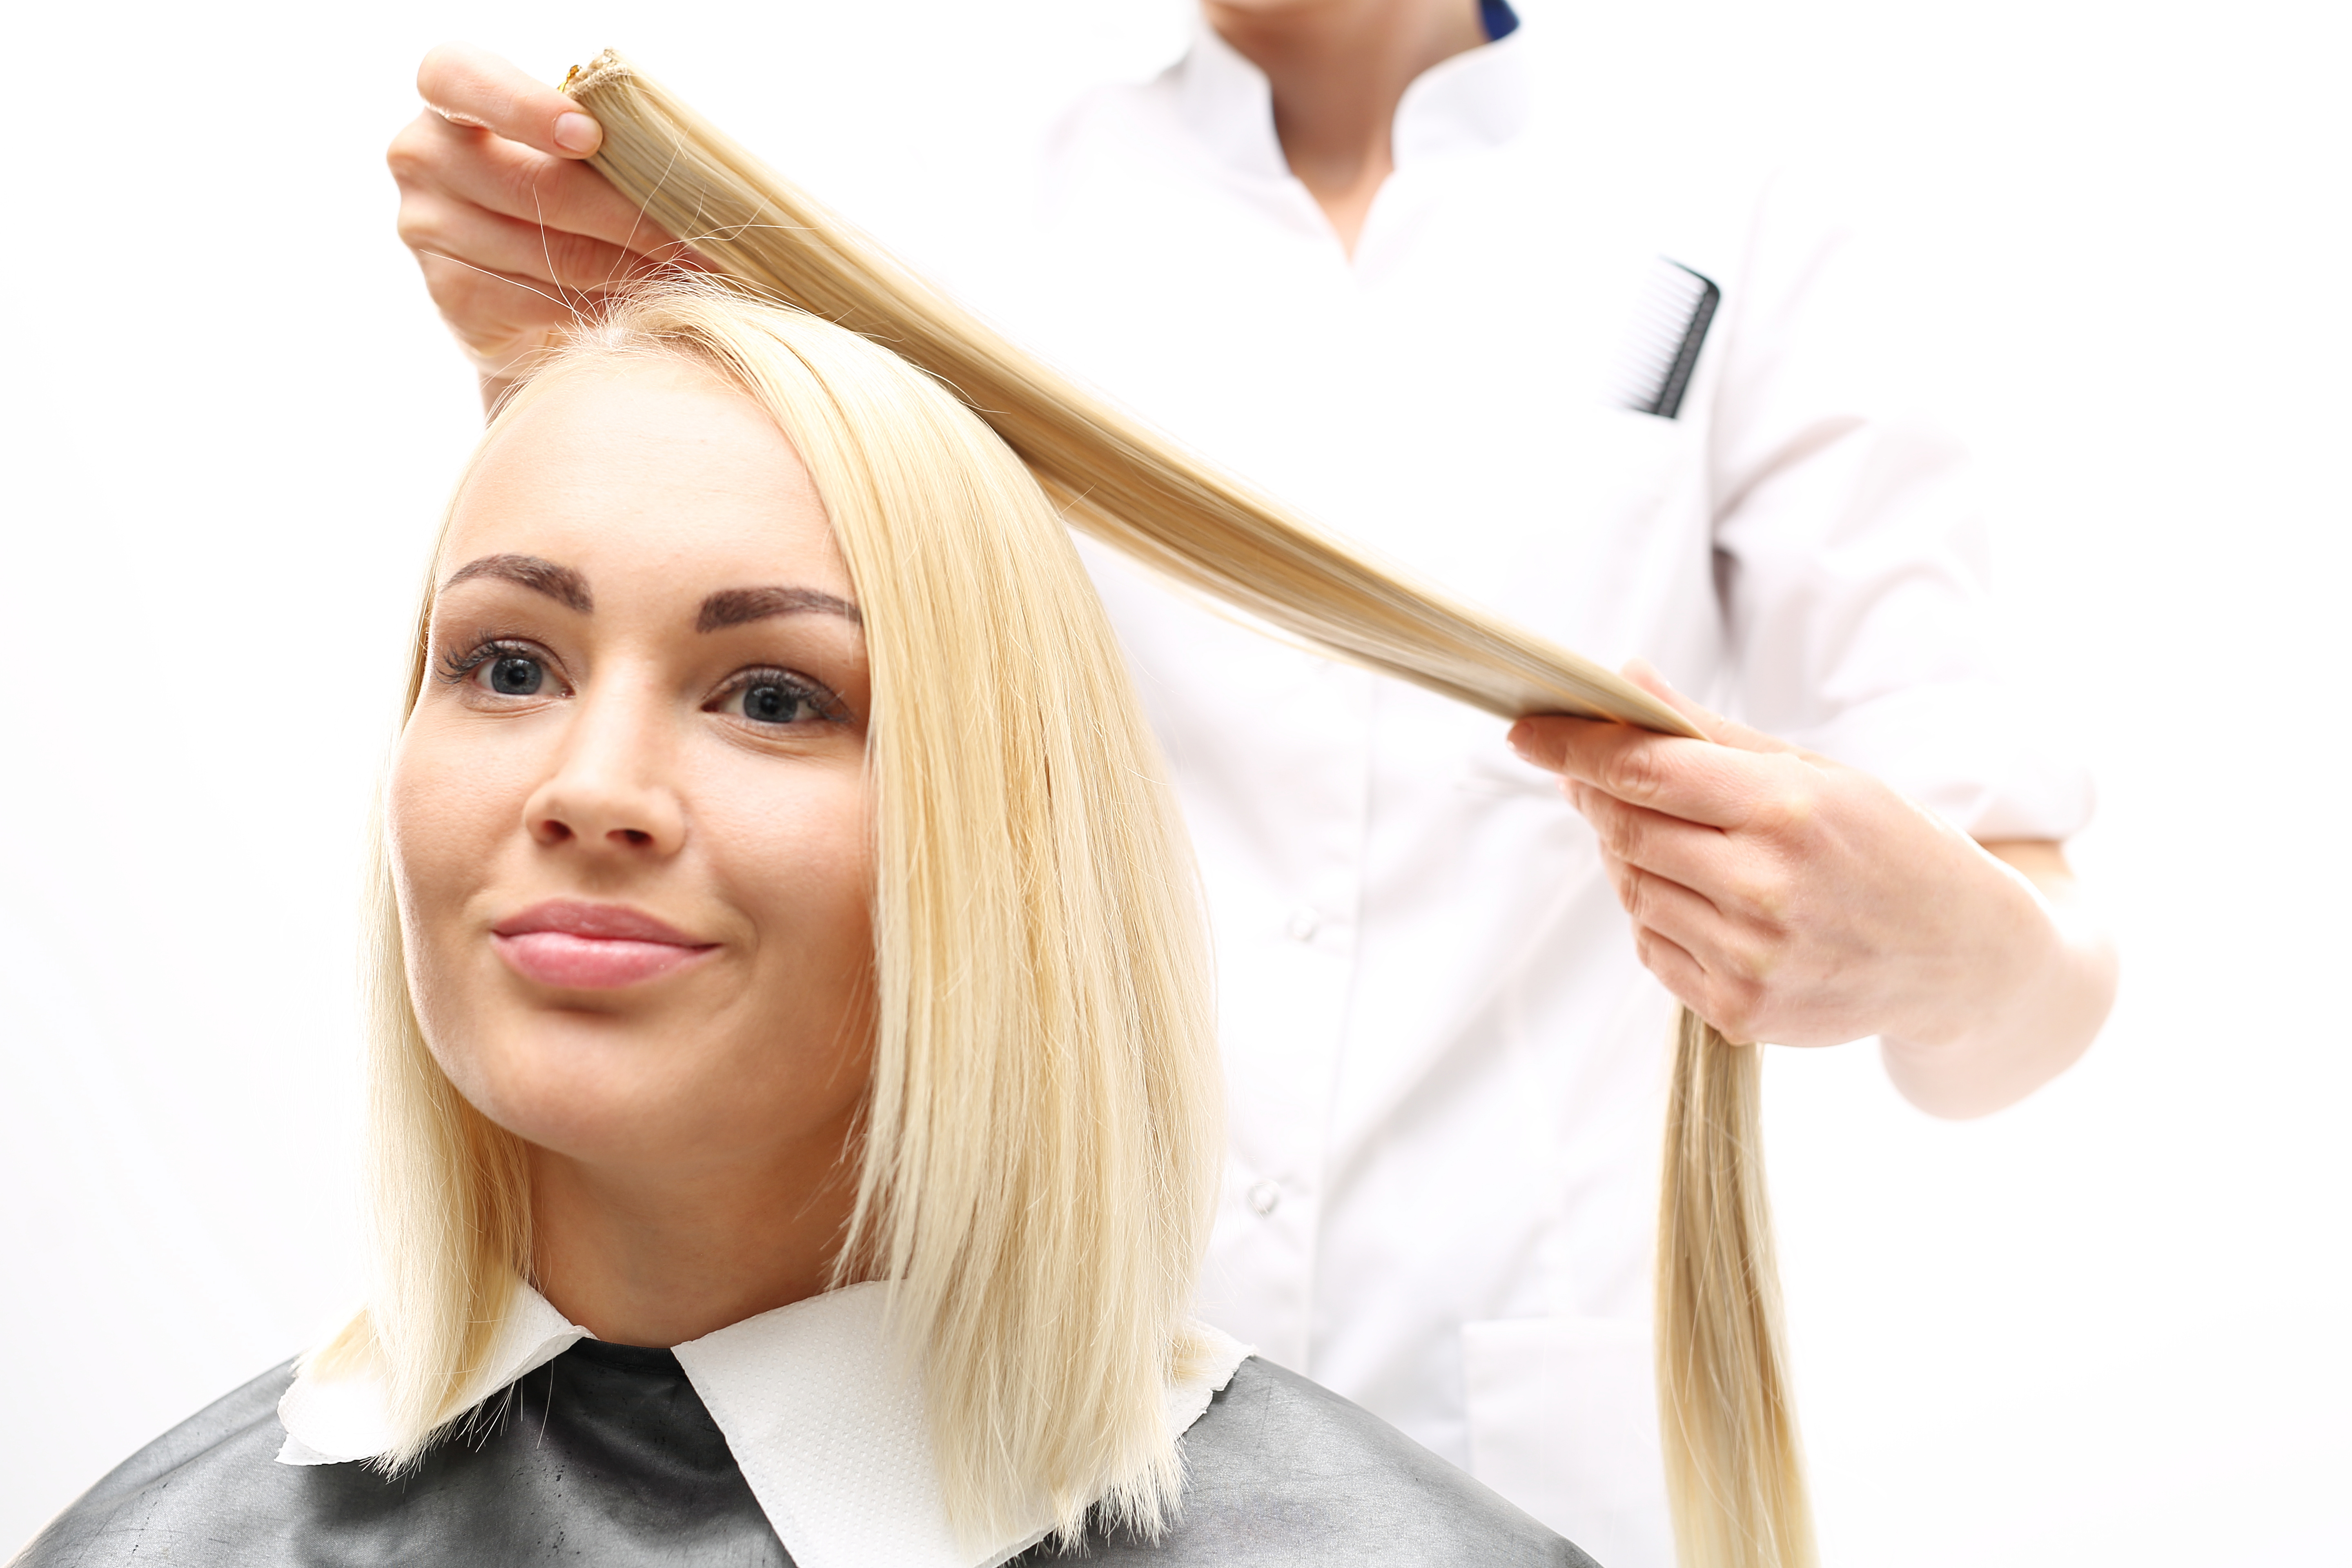 Schools for Cosmetology in Overland Park, KS Include Business Training in Their Programs